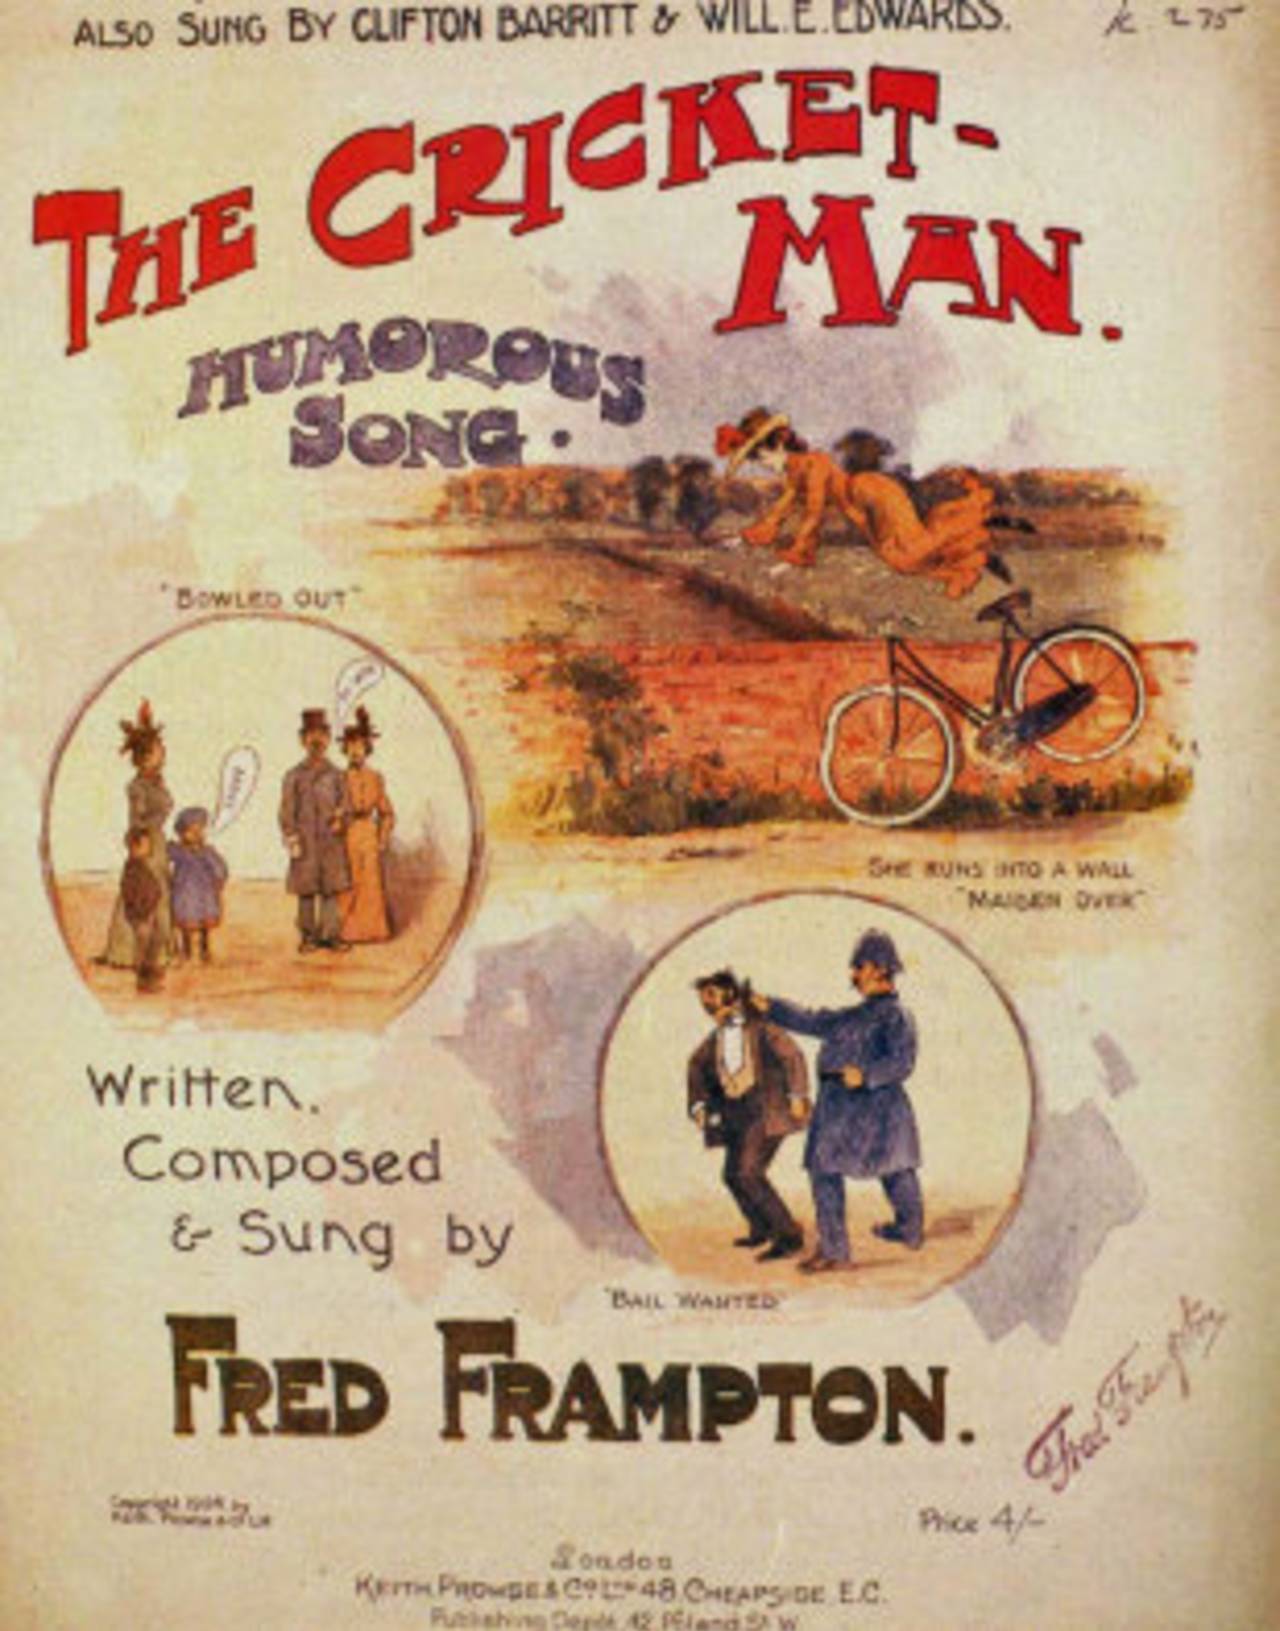 Cover image of the 1904 single titled "The Cricket Man"